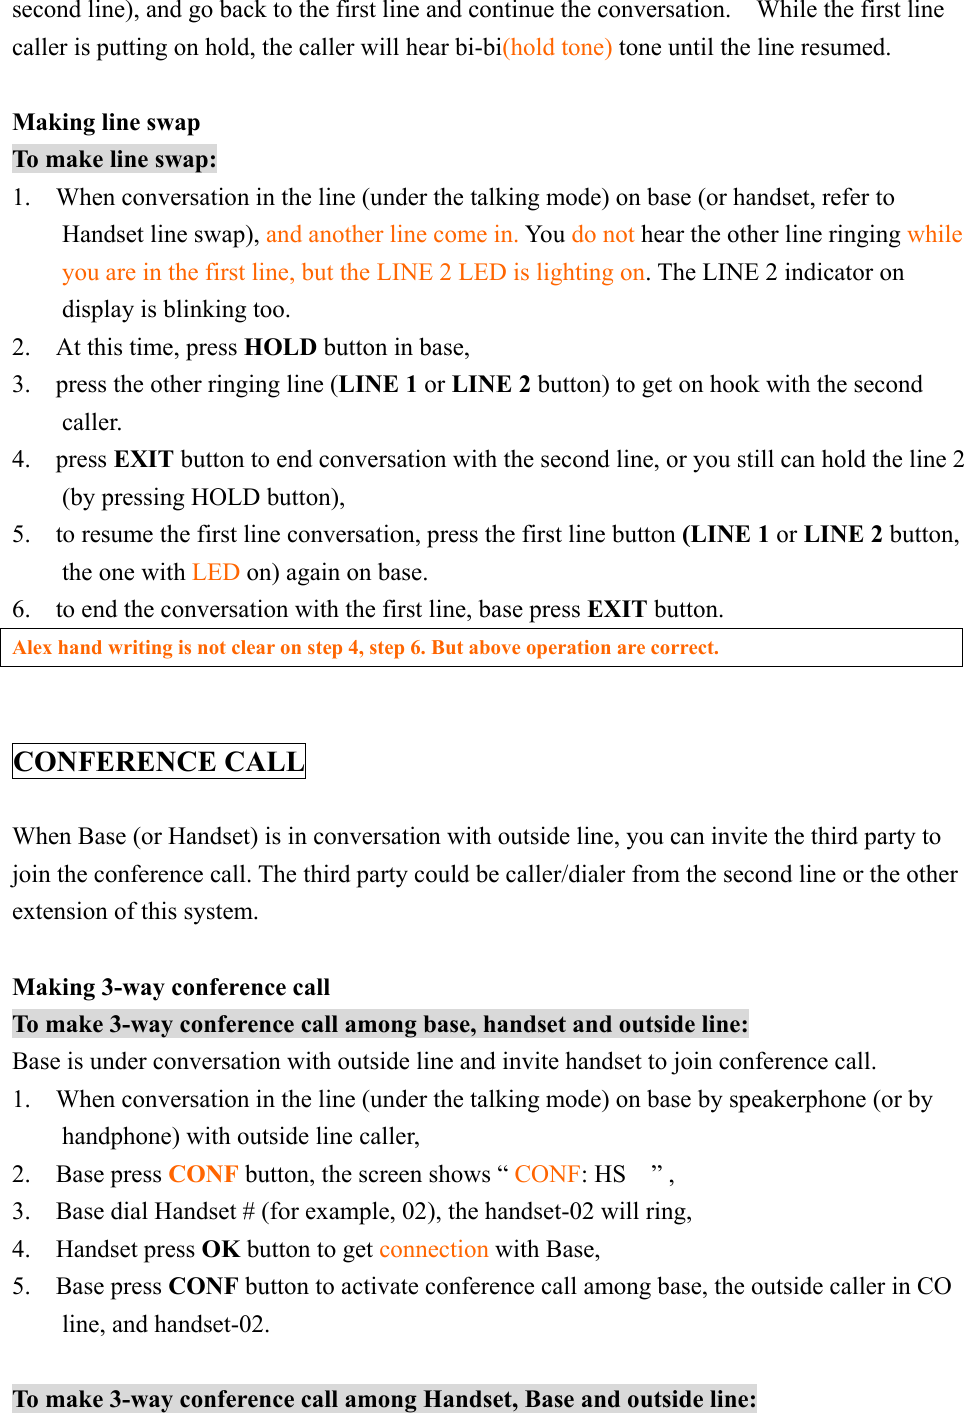 second line), and go back to the first line and continue the conversation.    While the first line caller is putting on hold, the caller will hear bi-bi(hold tone) tone until the line resumed.  Making line swap To make line swap: 1.    When conversation in the line (under the talking mode) on base (or handset, refer to Handset line swap), and another line come in. Yo u do not hear the other line ringing while you are in the first line, but the LINE 2 LED is lighting on. The LINE 2 indicator on display is blinking too. 2.  At this time, press HOLD button in base, 3.  press the other ringing line (LINE 1 or LINE 2 button) to get on hook with the second caller. 4.  press EXIT button to end conversation with the second line, or you still can hold the line 2 (by pressing HOLD button), 5.    to resume the first line conversation, press the first line button (LINE 1 or LINE 2 button,    the one with LED on) again on base. 6.    to end the conversation with the first line, base press EXIT button. Alex hand writing is not clear on step 4, step 6. But above operation are correct.   CONFERENCE CALL  When Base (or Handset) is in conversation with outside line, you can invite the third party to join the conference call. The third party could be caller/dialer from the second line or the other extension of this system.    Making 3-way conference call To make 3-way conference call among base, handset and outside line: Base is under conversation with outside line and invite handset to join conference call. 1.    When conversation in the line (under the talking mode) on base by speakerphone (or by handphone) with outside line caller,   2.  Base press CONF button, the screen shows “ CONF: HS  ” ,  3.    Base dial Handset # (for example, 02), the handset-02 will ring,   4.  Handset press OK button to get connection with Base, 5.  Base press CONF button to activate conference call among base, the outside caller in CO line, and handset-02.  To make 3-way conference call among Handset, Base and outside line: 